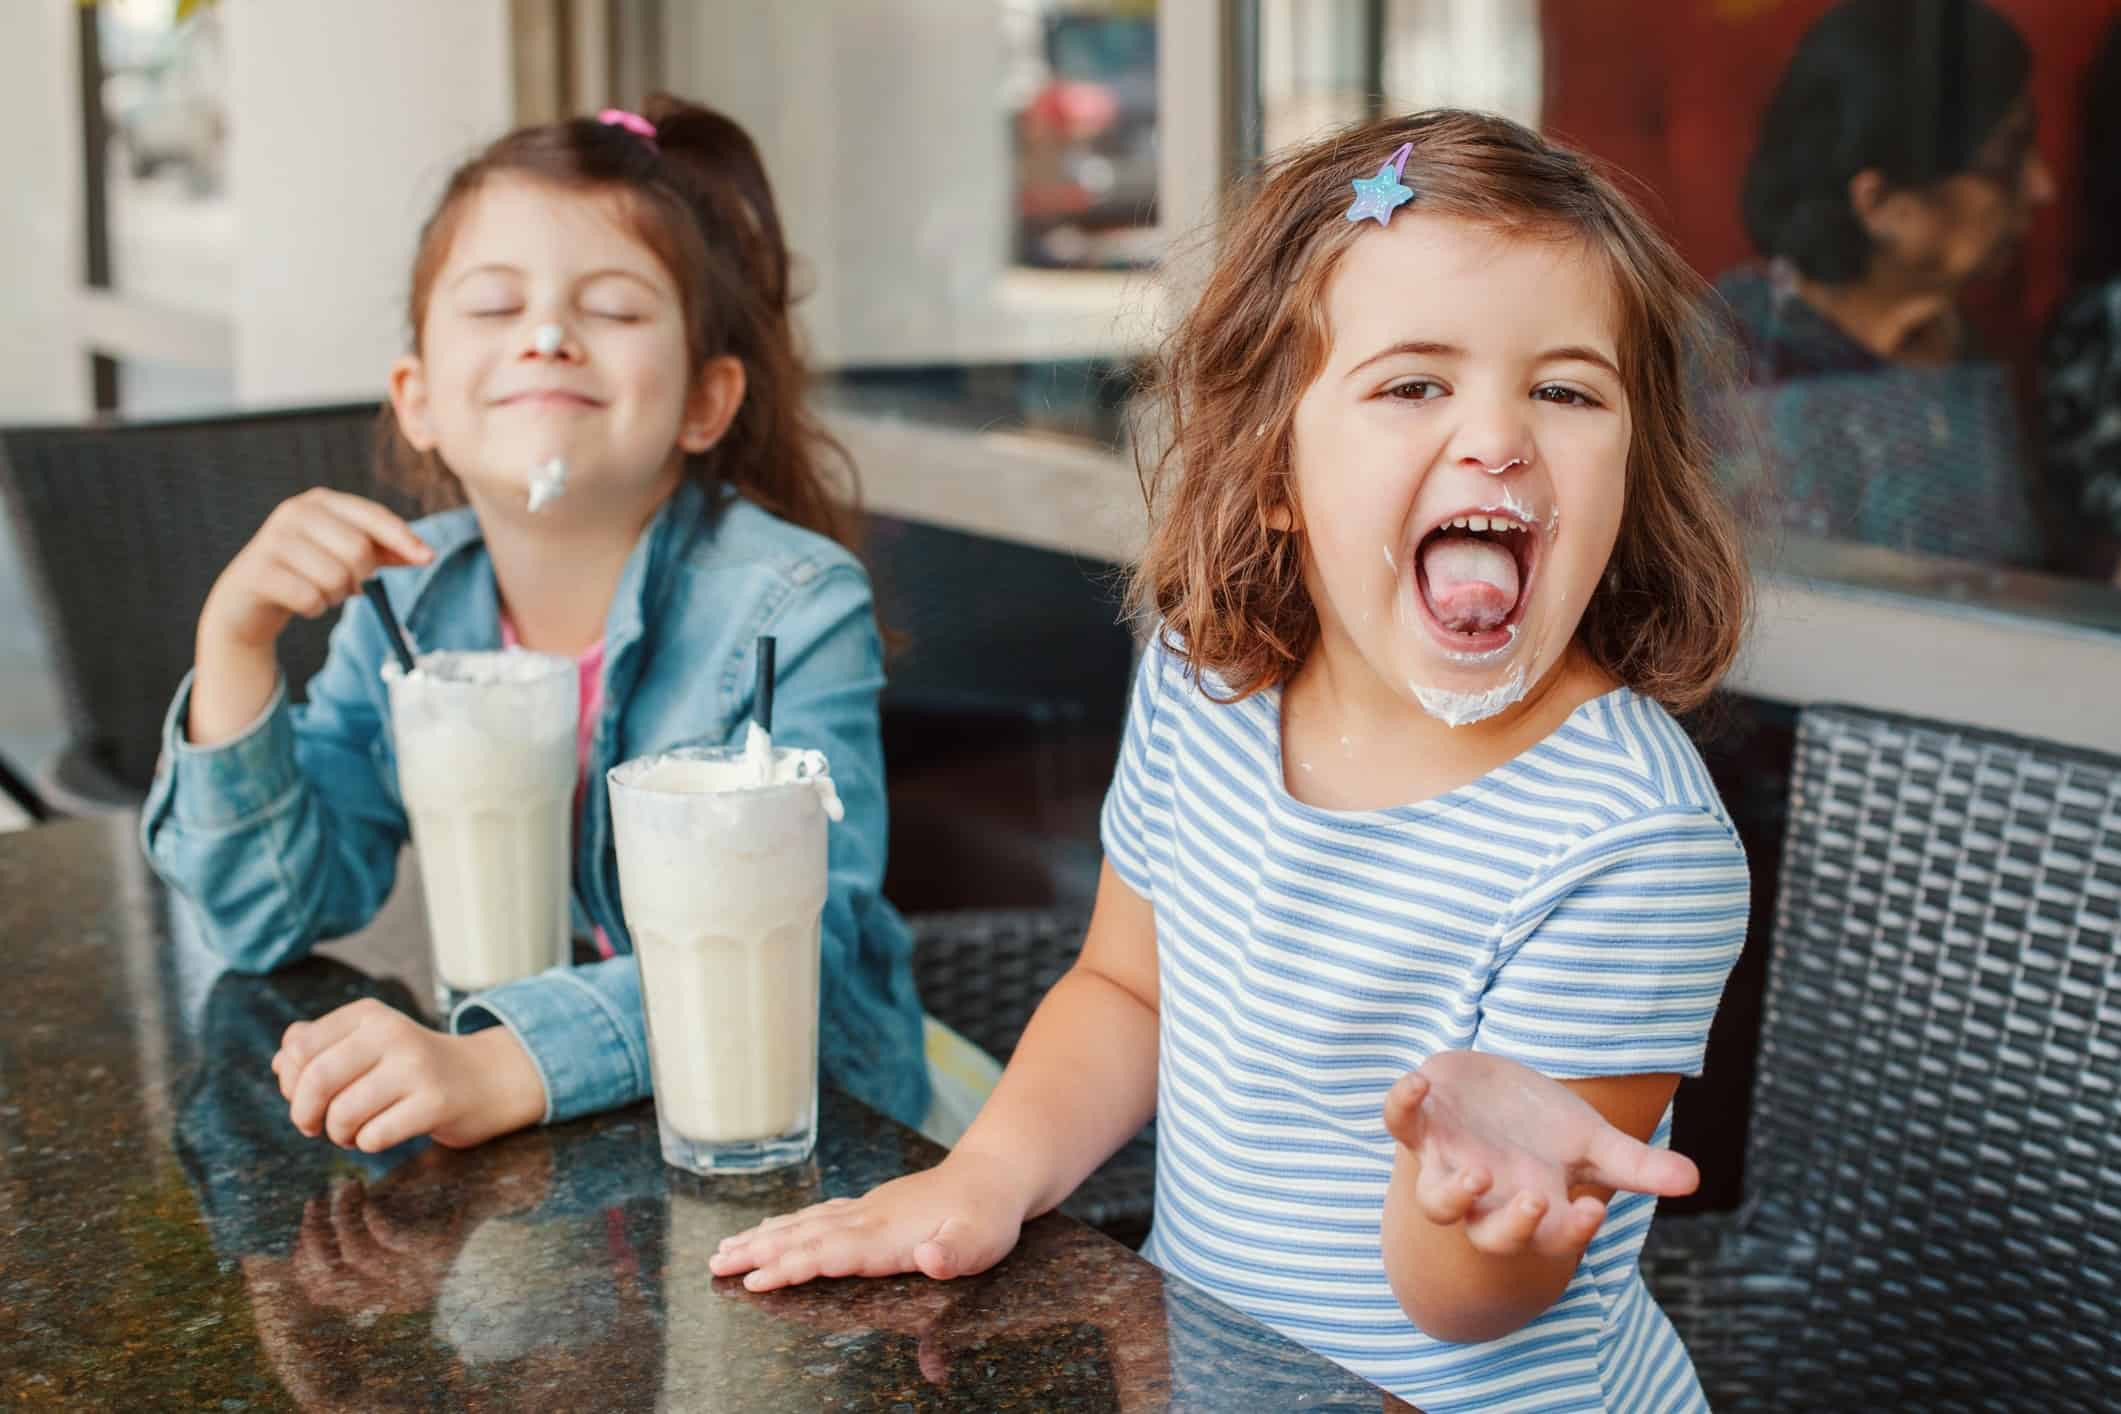 Two young girls drinking milkshakes with milk around their mouths